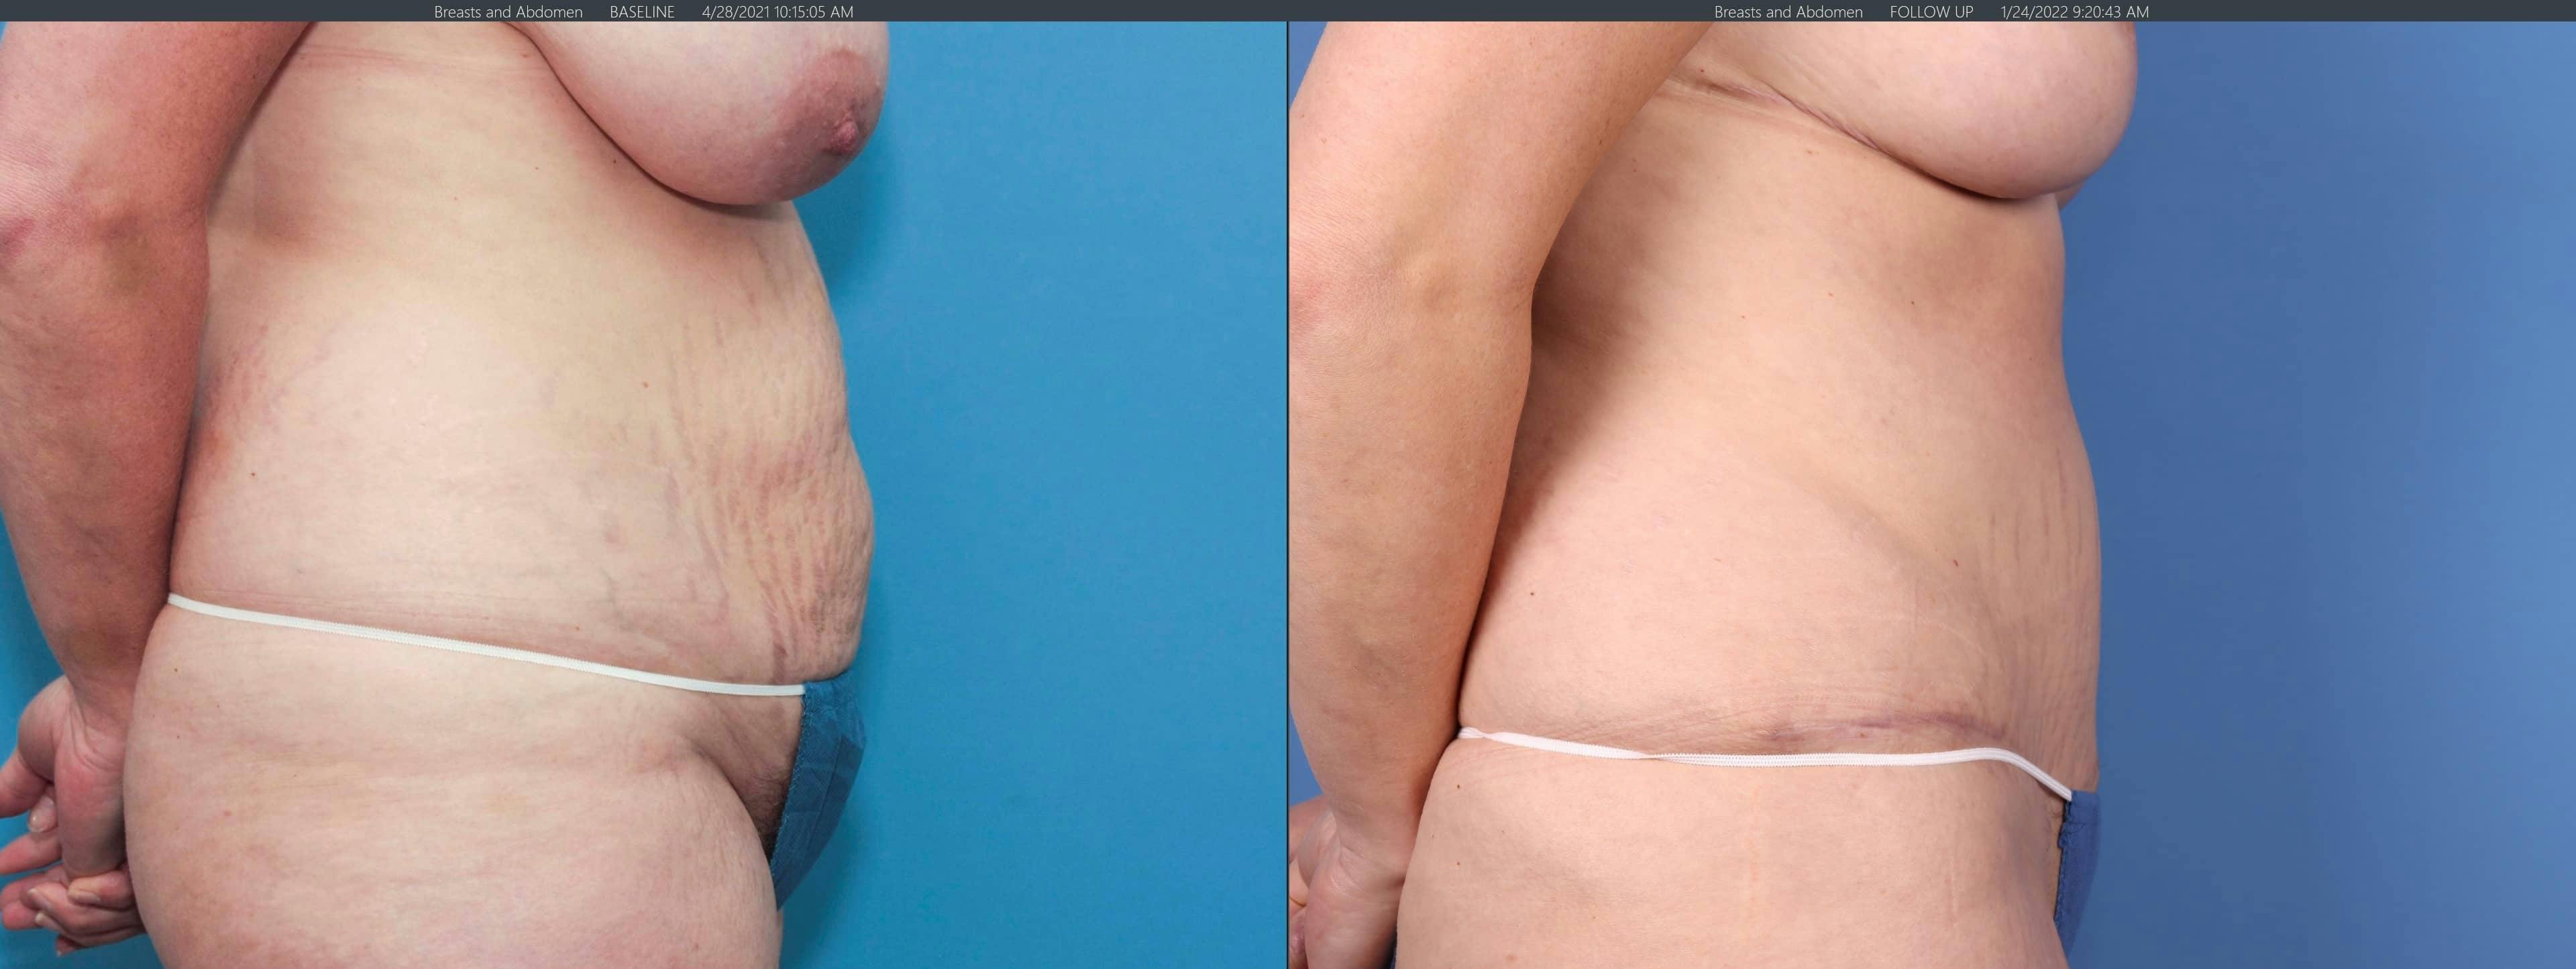 Tummy Tuck Gallery - Patient 101097955 - Image 2